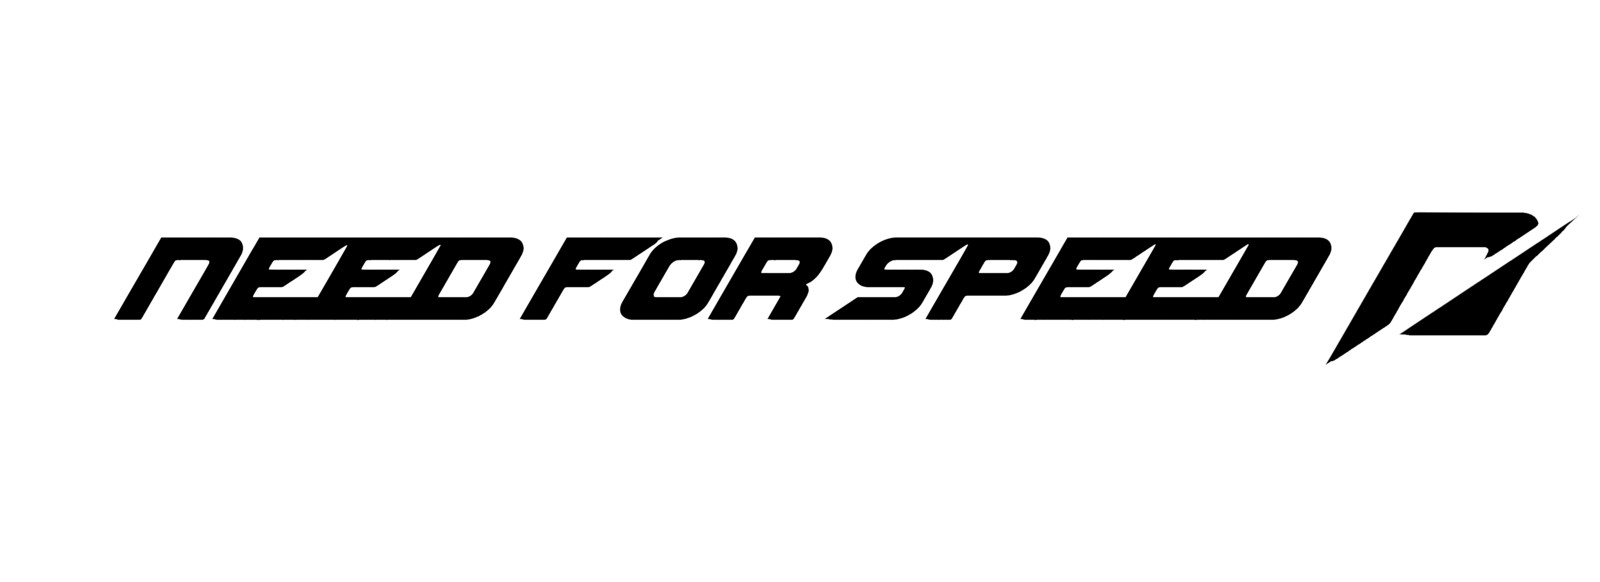 Need for Speed Franchise - Logotype (Modified)